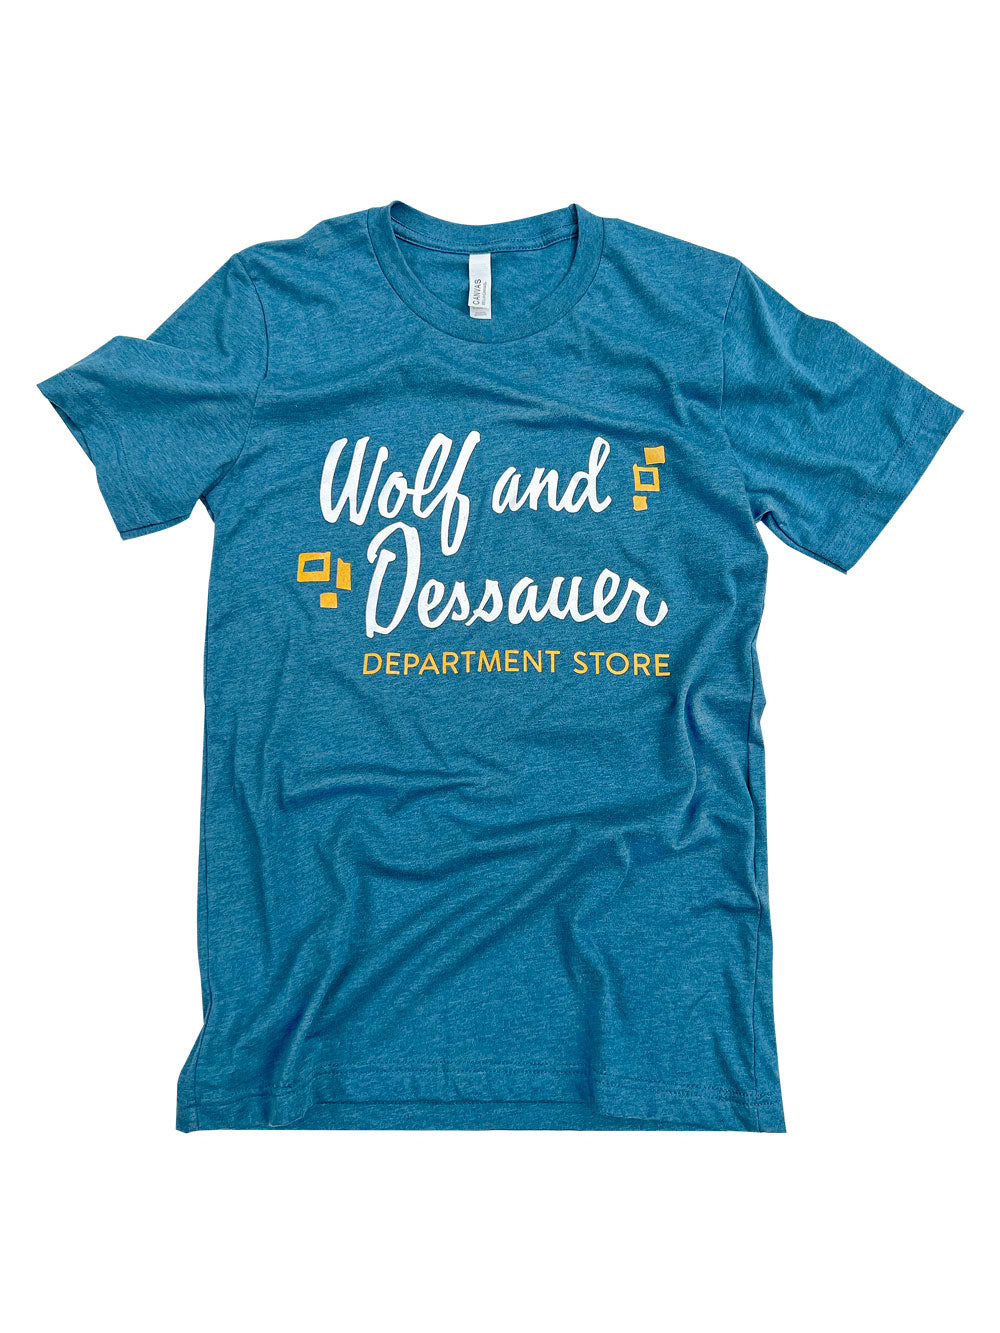 Wolf and Dessauer Department Store teal heather t-shirt